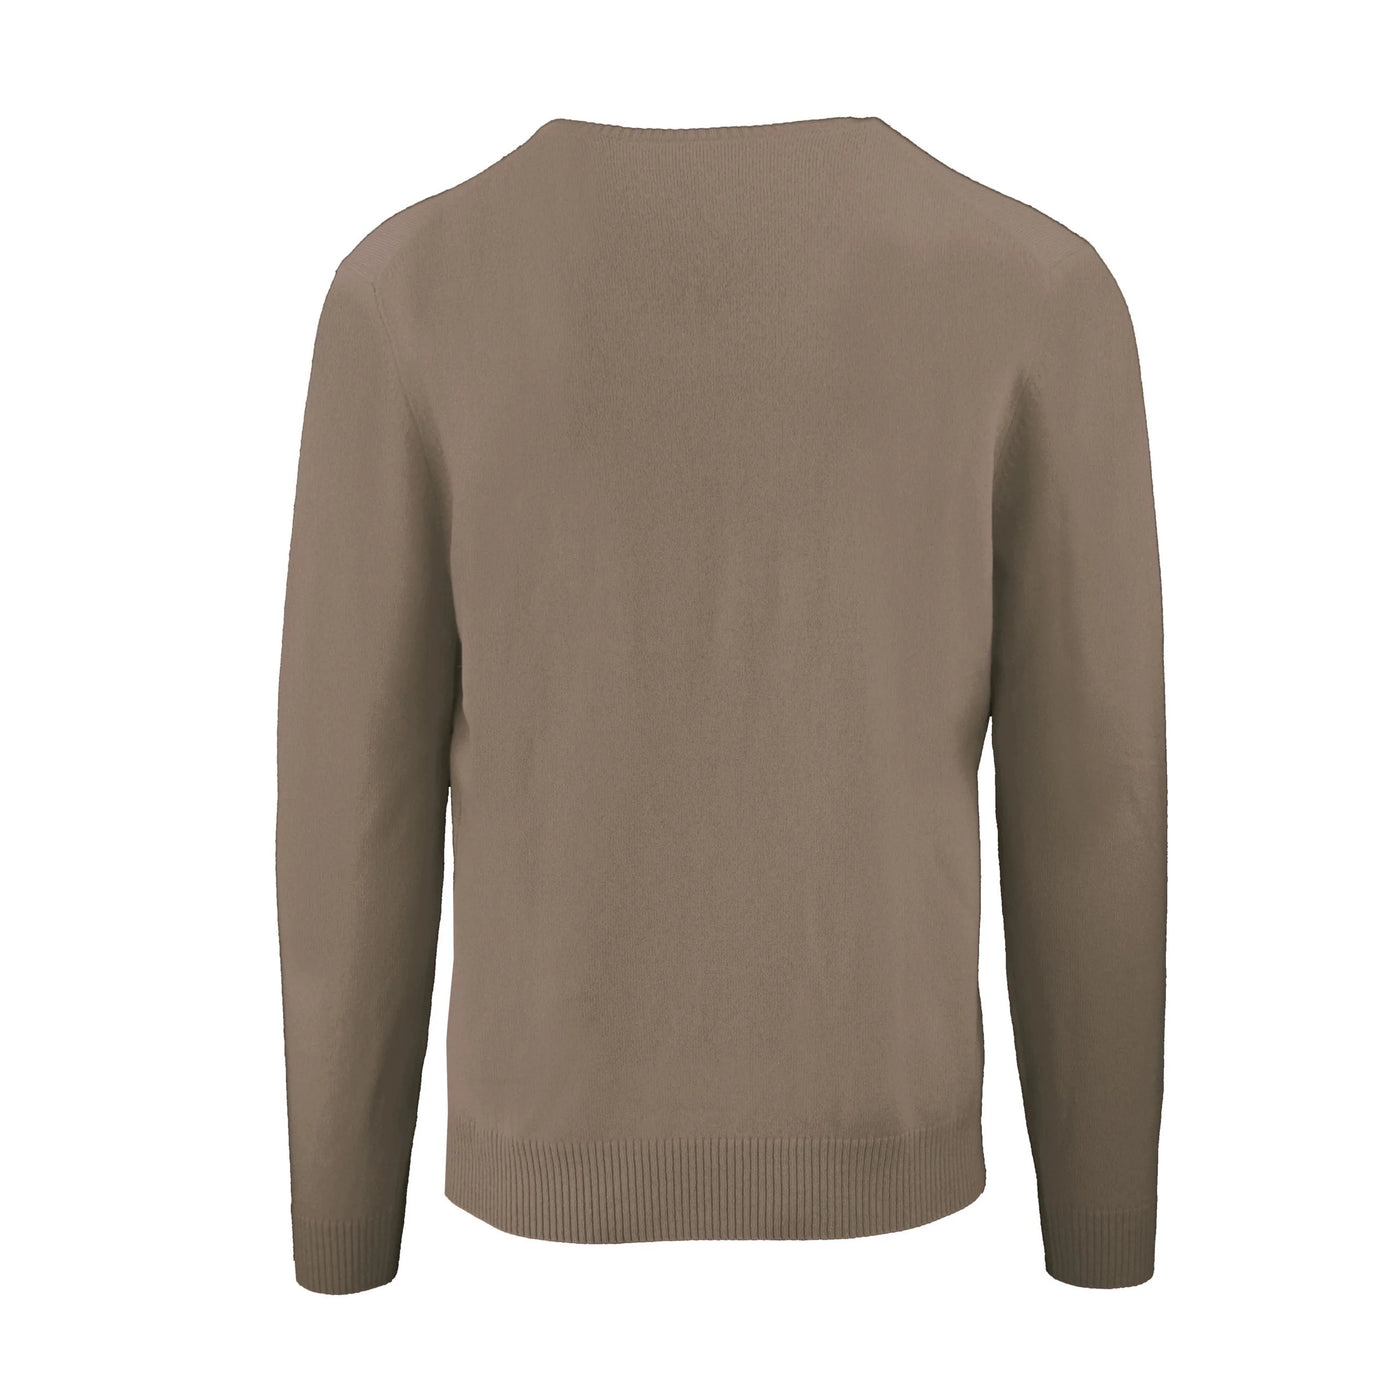 Malo Beige Cashmere Sweater #men, Beige, feed-agegroup-adult, feed-color-Beige, feed-gender-male, M, Malo, S, Sweaters - Men - Clothing, XL, XXL at SEYMAYKA